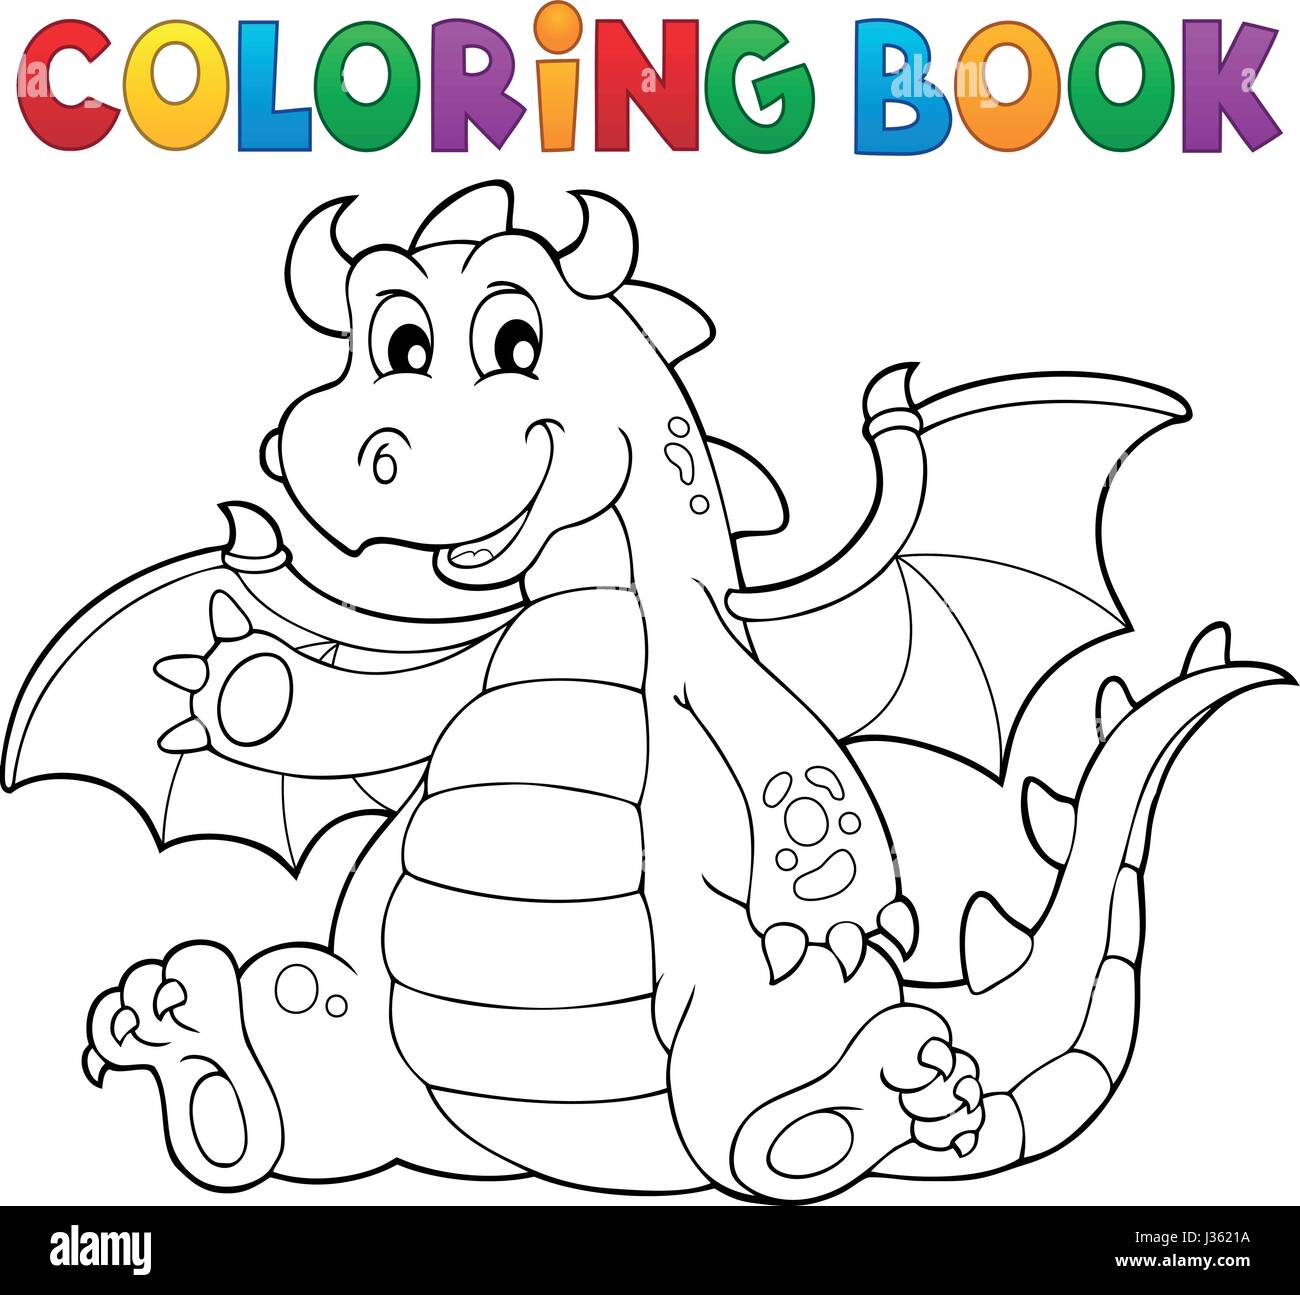 Coloring book dragon theme image 6 - eps10 vector illustration Stock ...